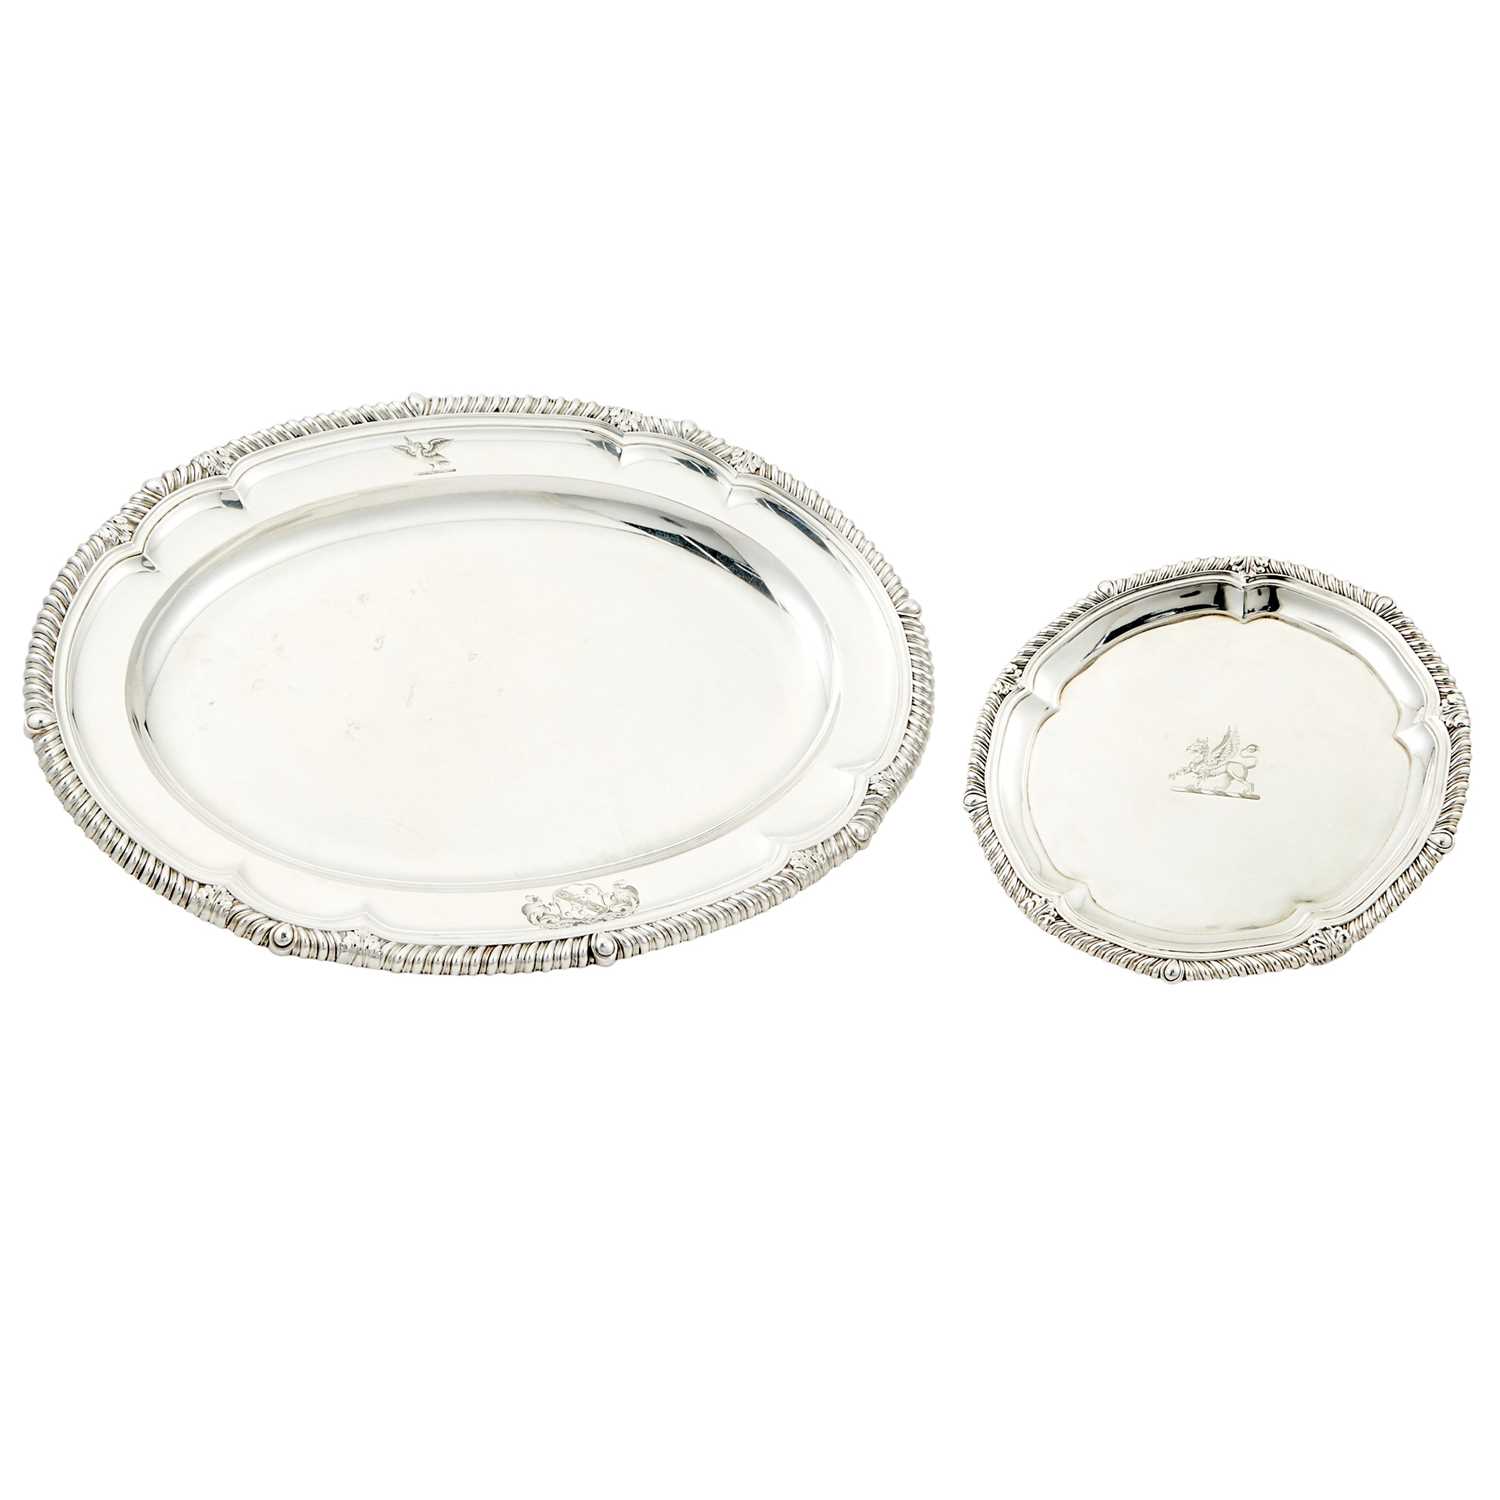 Lot 148 - George III Sterling Silver Platter and Footed Salver